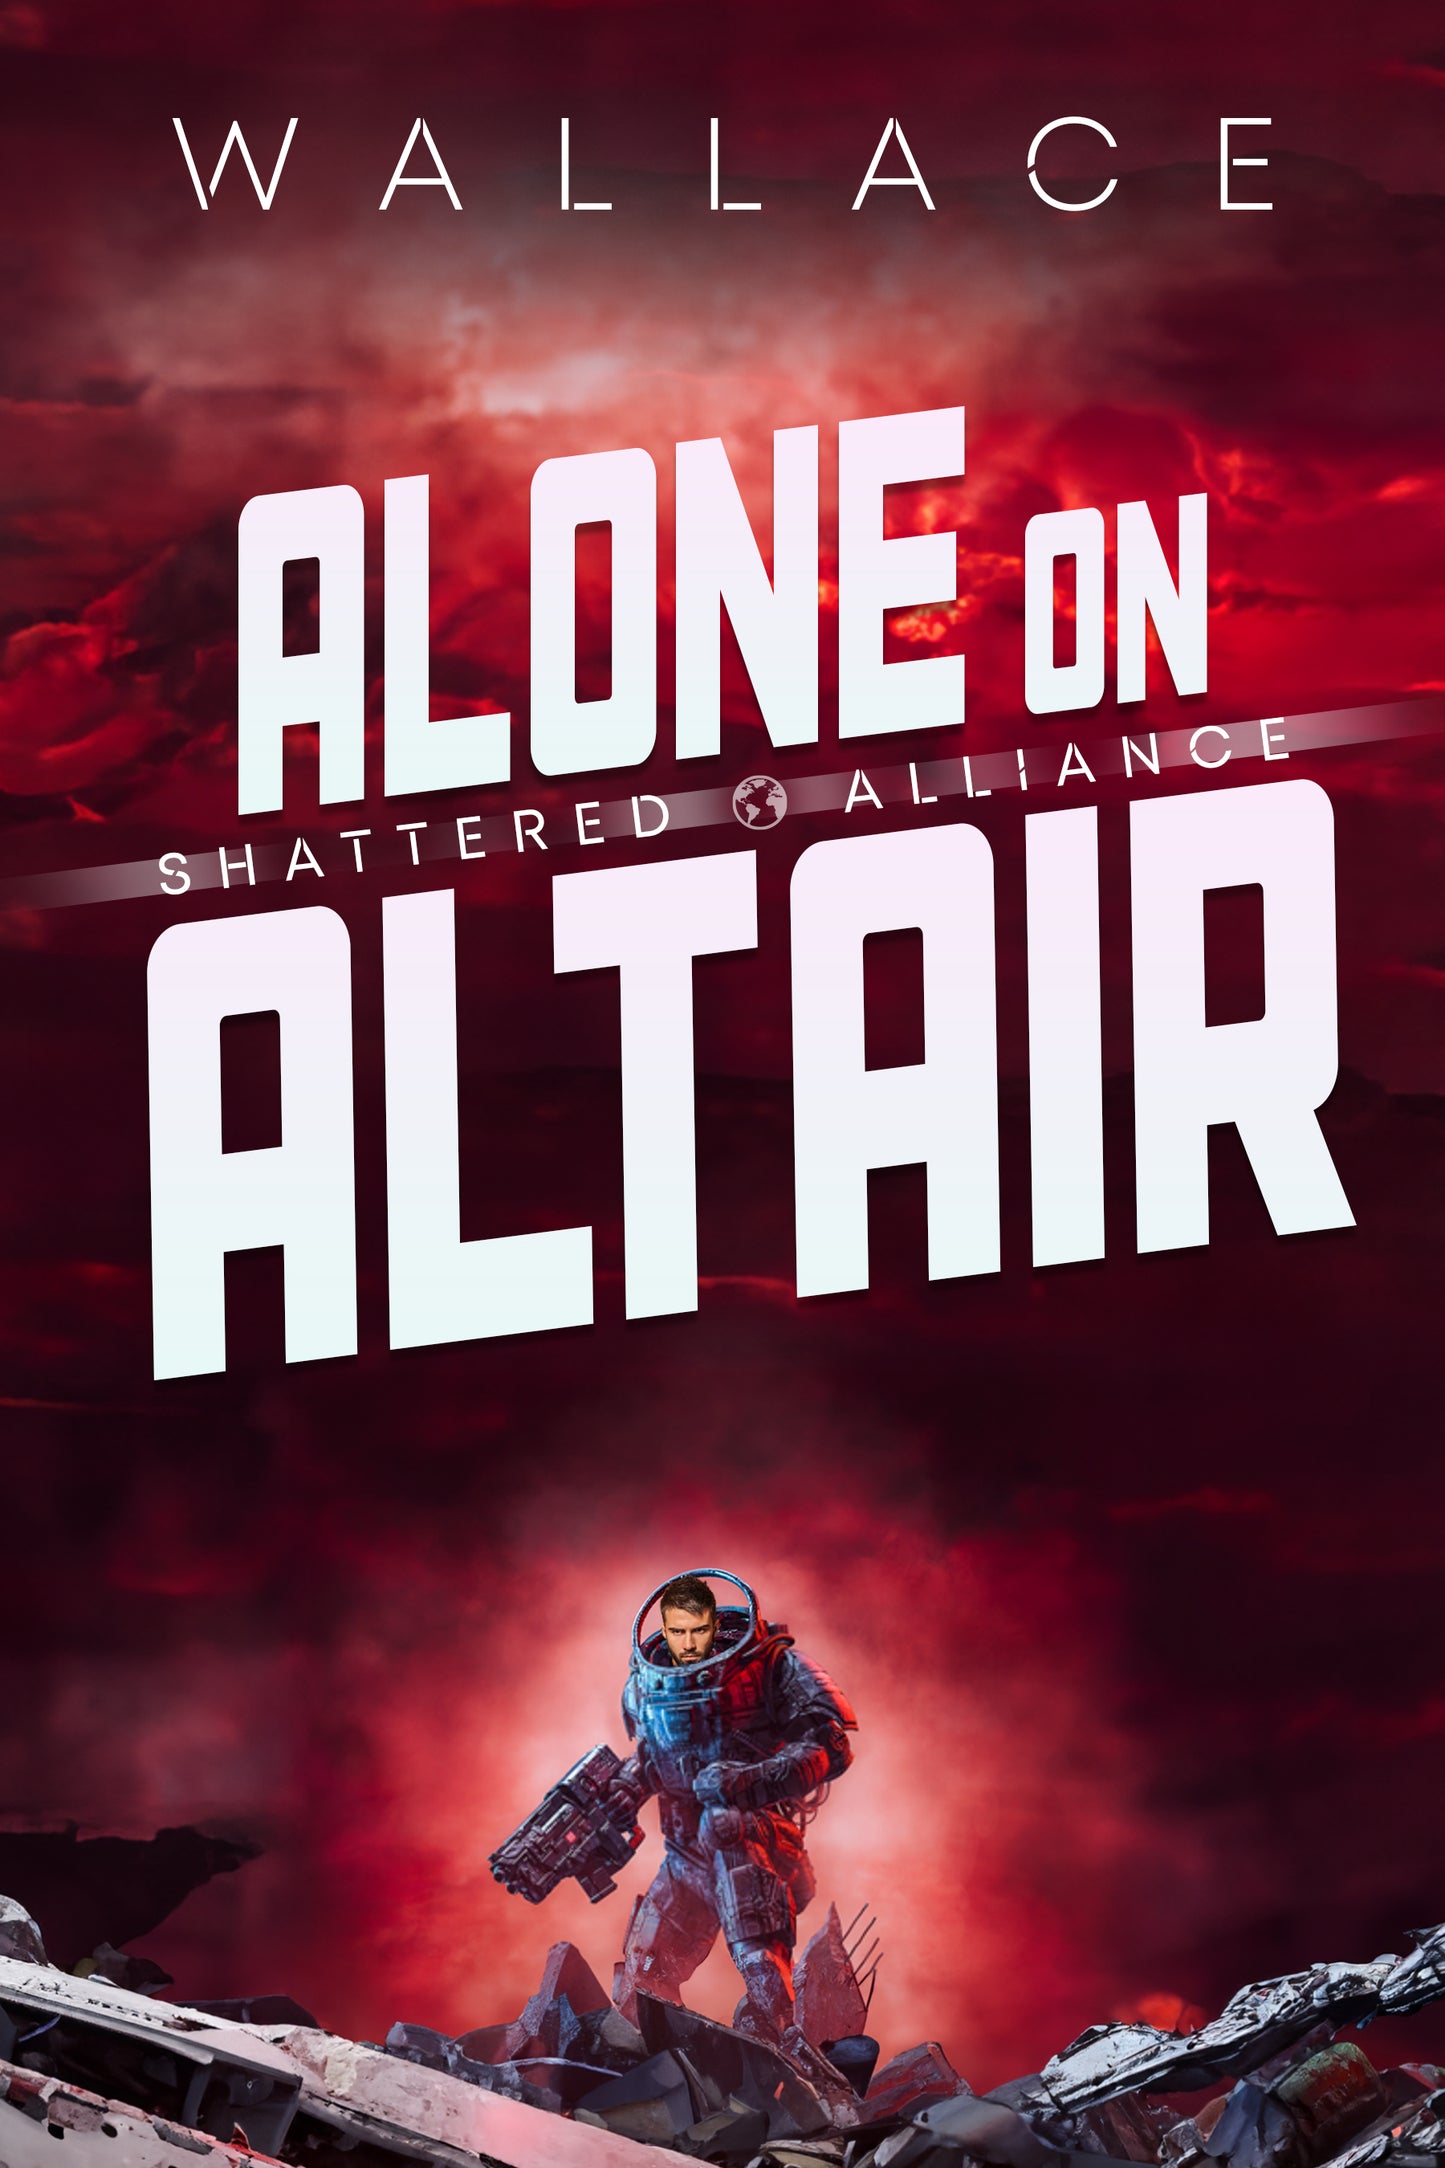 Alone on Altair - Book 3 (Kindle and ePub)